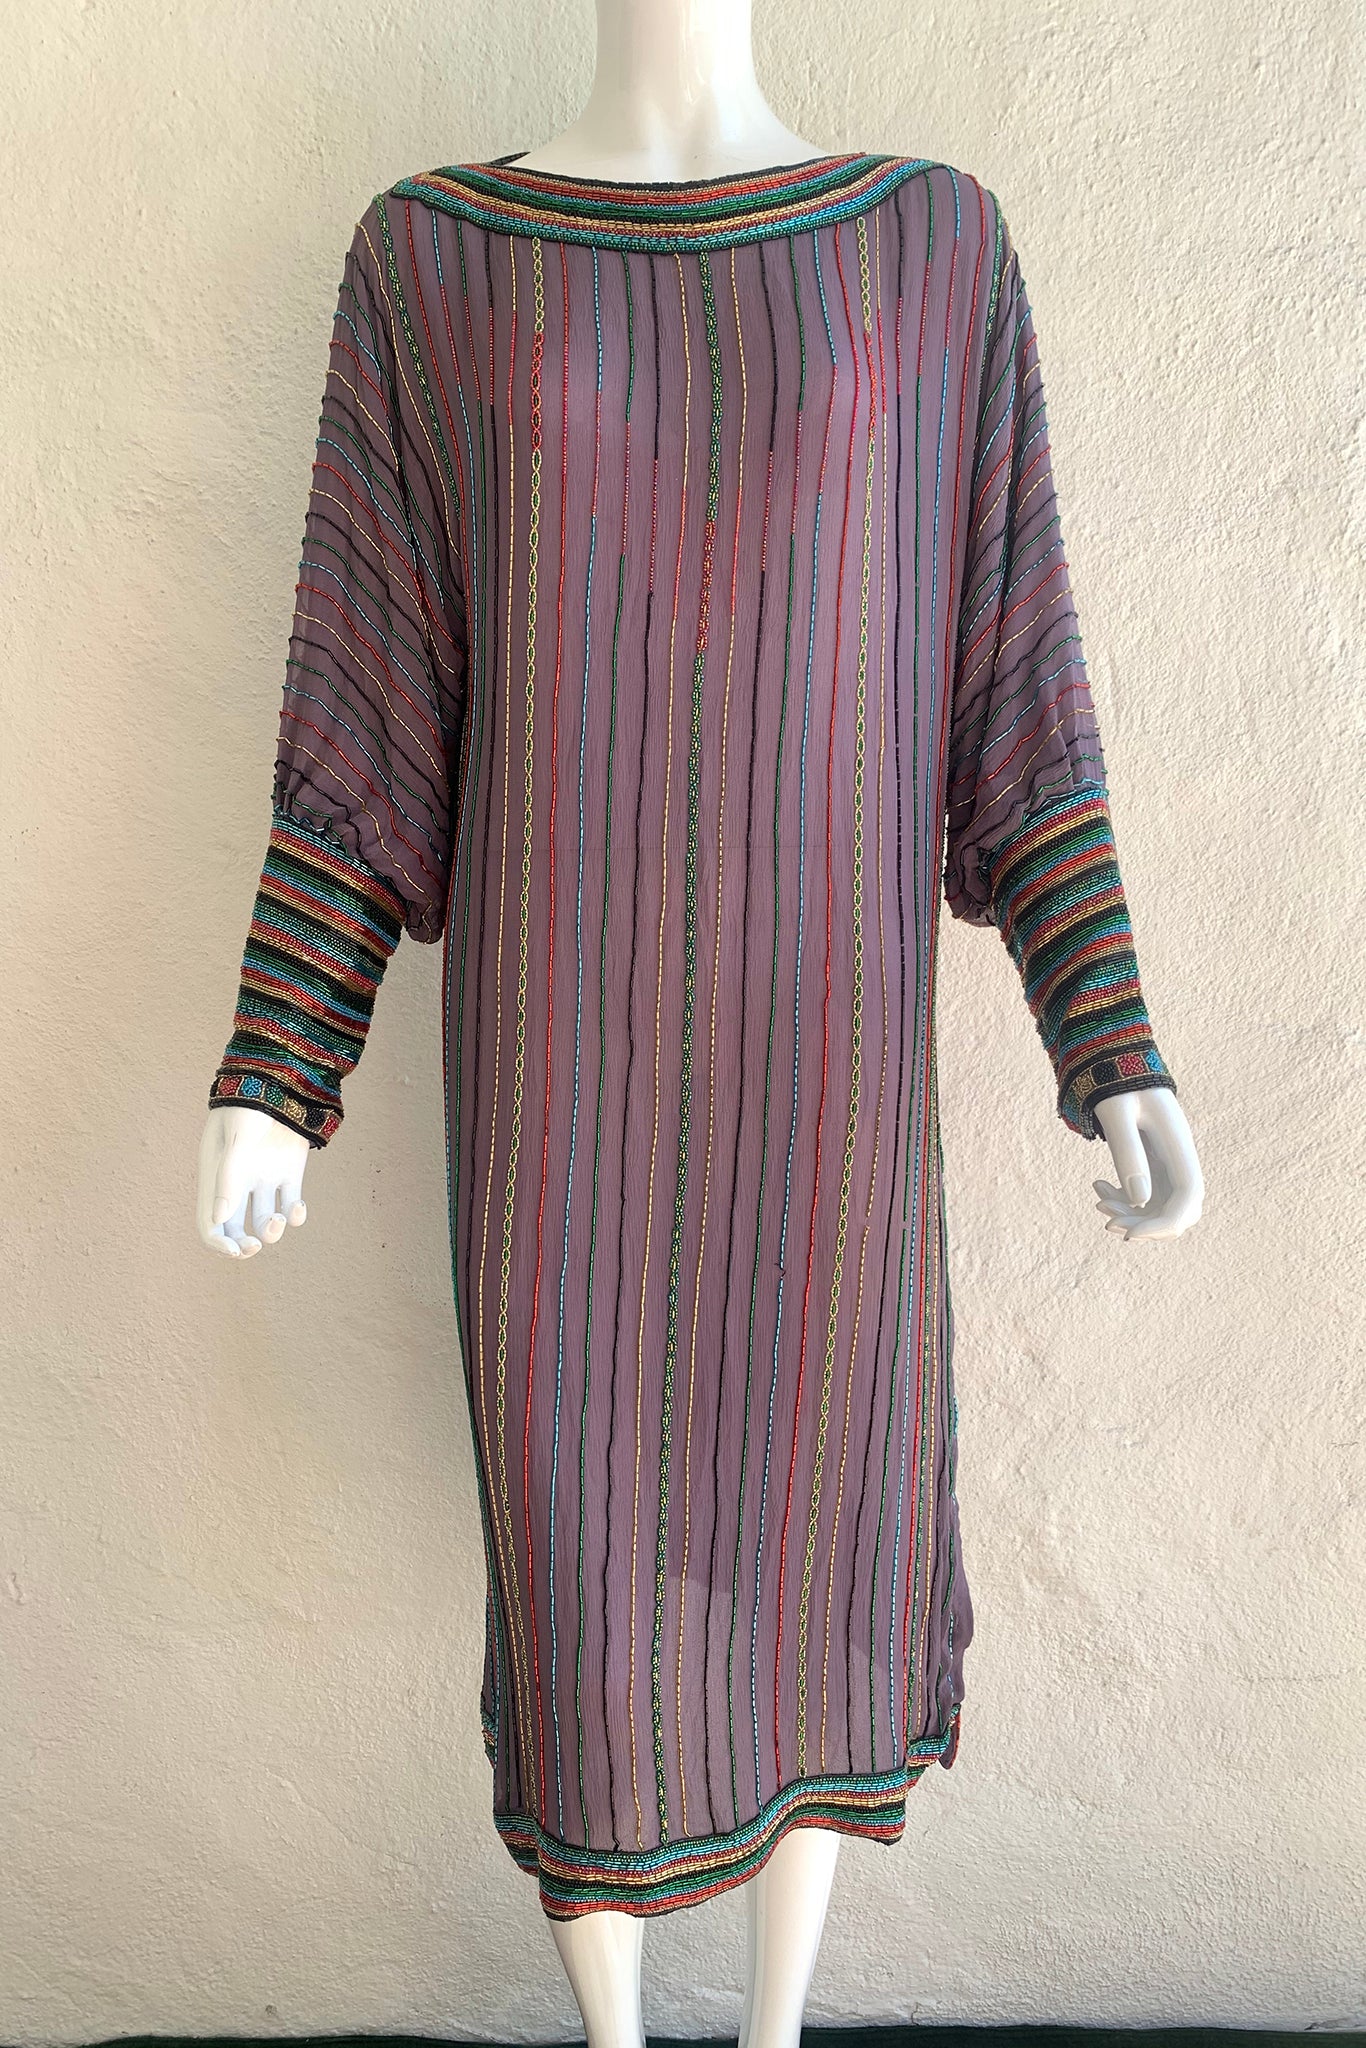 Vintage Sistermax Rainbow Beaded Midi Shift Dress on Mannequin front crop at Recess